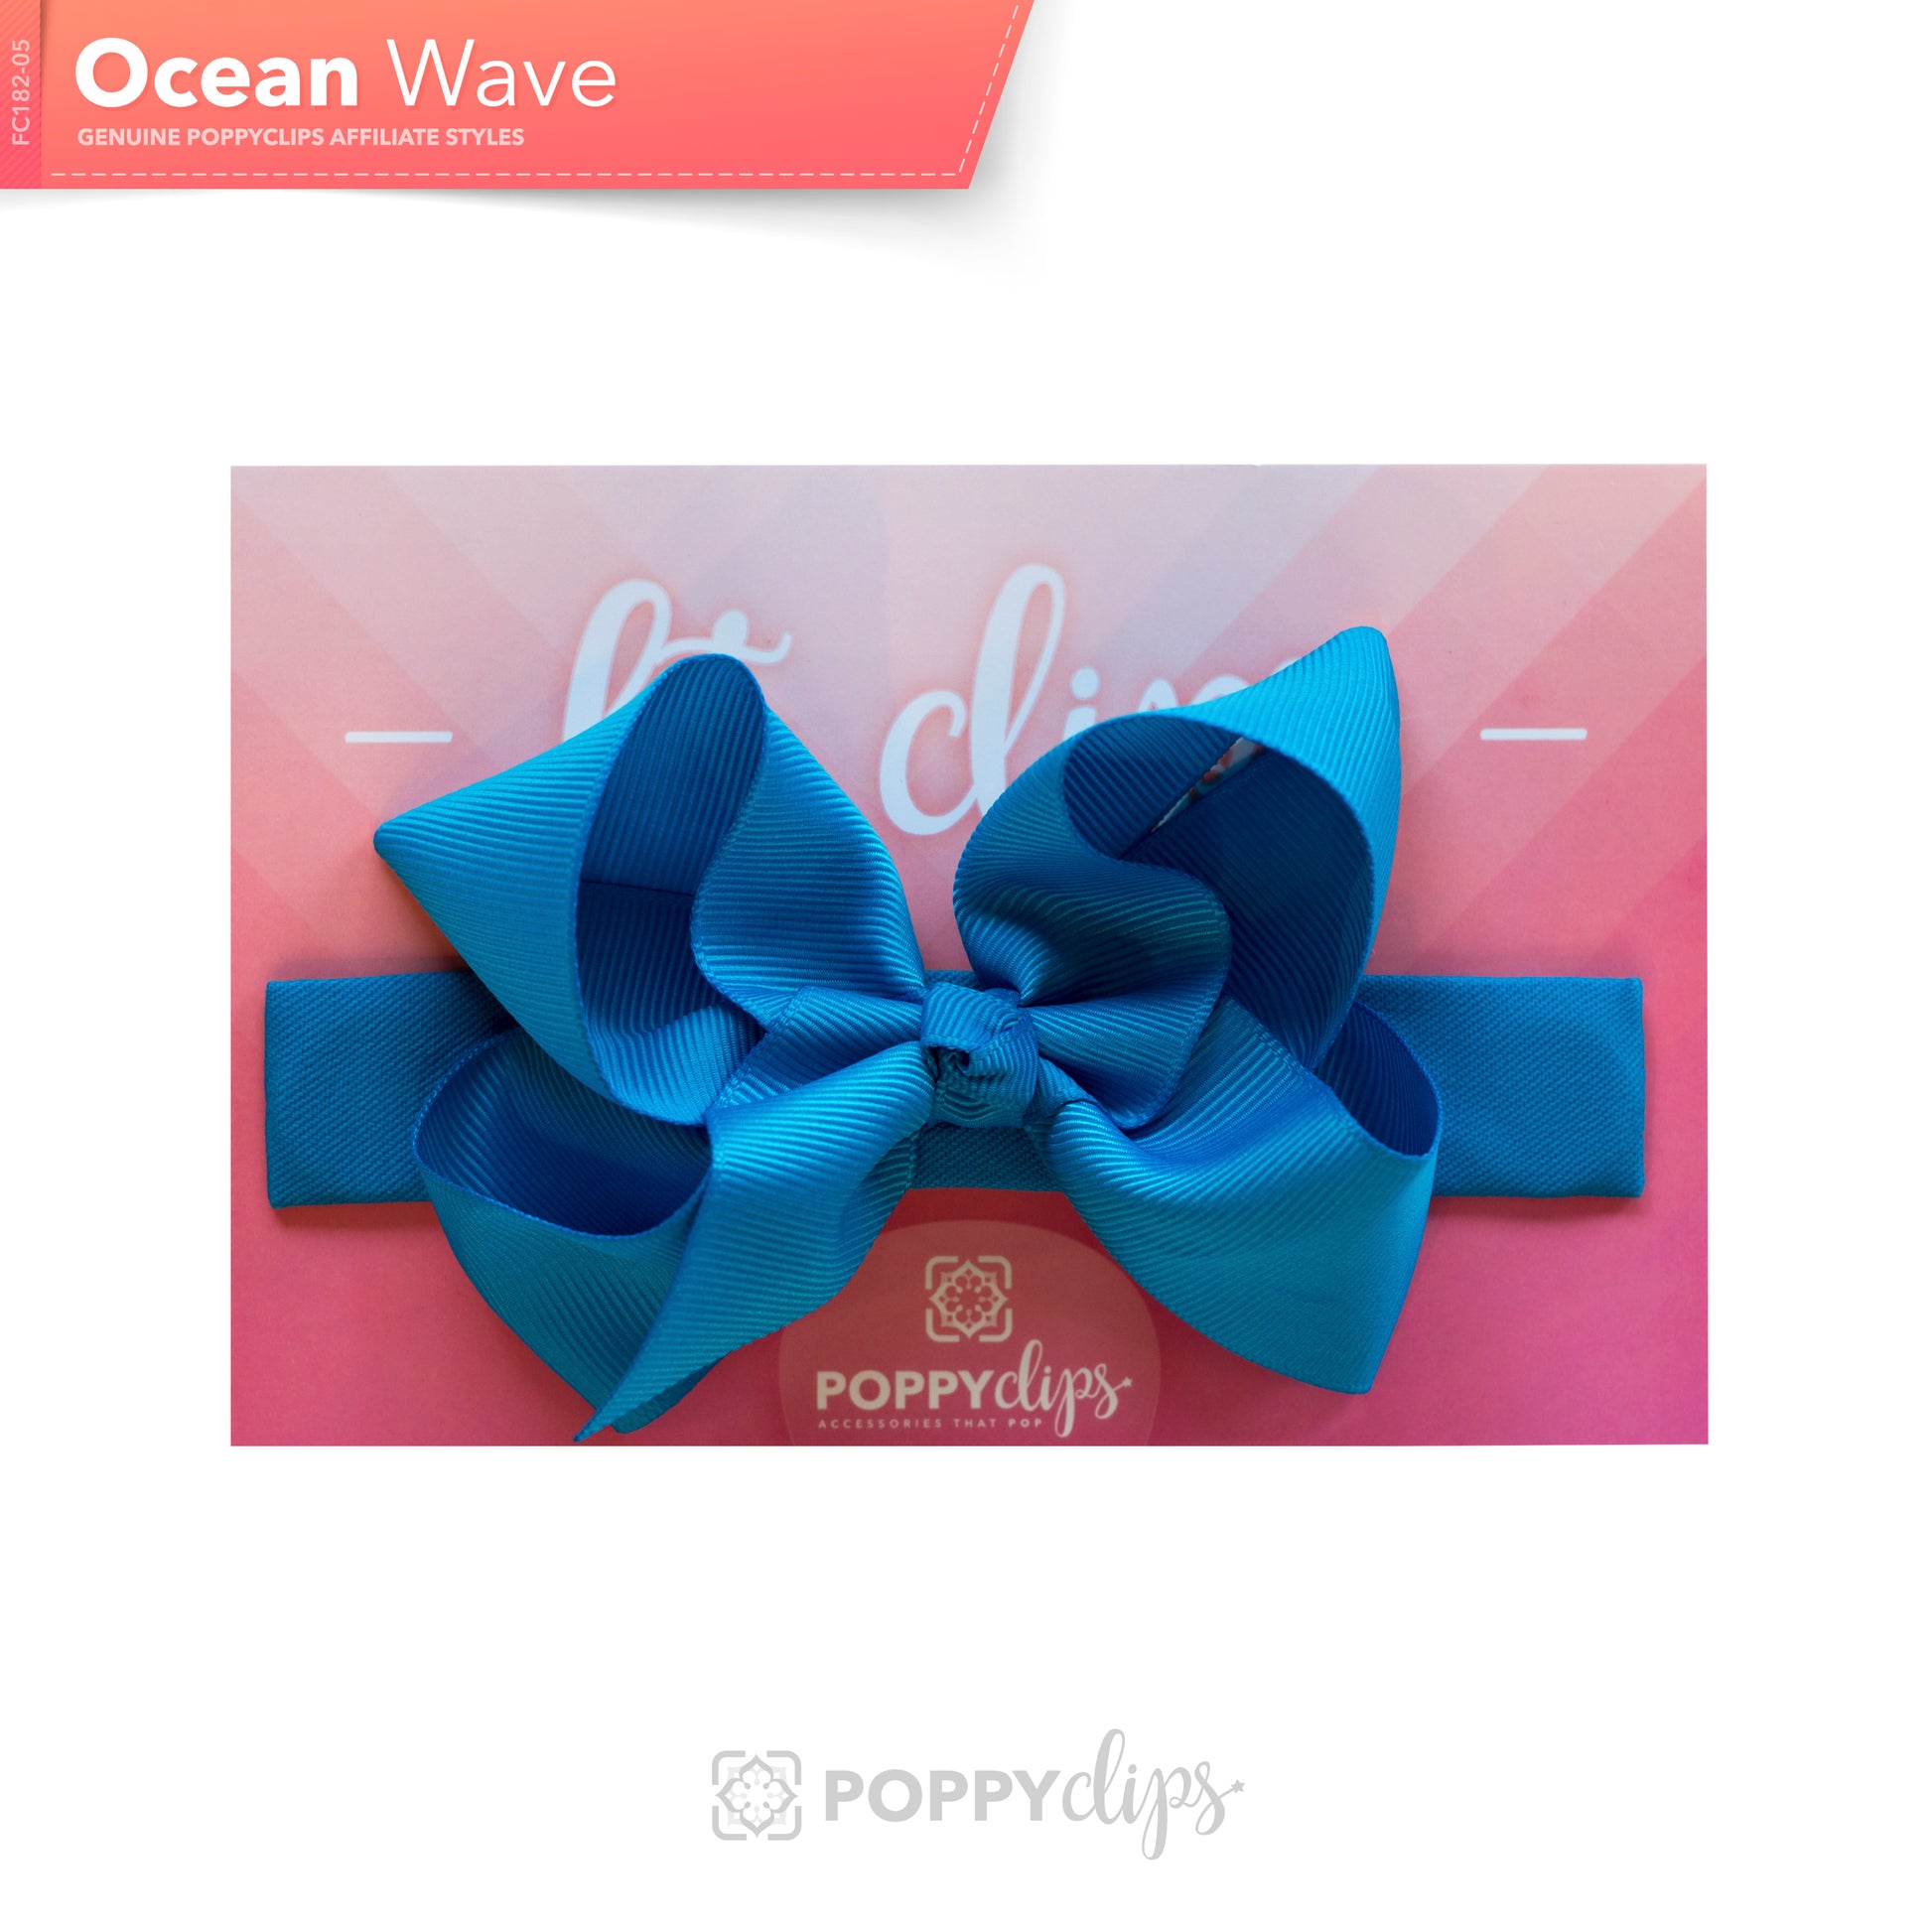 5 ¼” long by 7/8” wide ocean blue material with hidden magnets at each end.  Centered on the outside is a double ocean blue bow that is approximately 4” across.